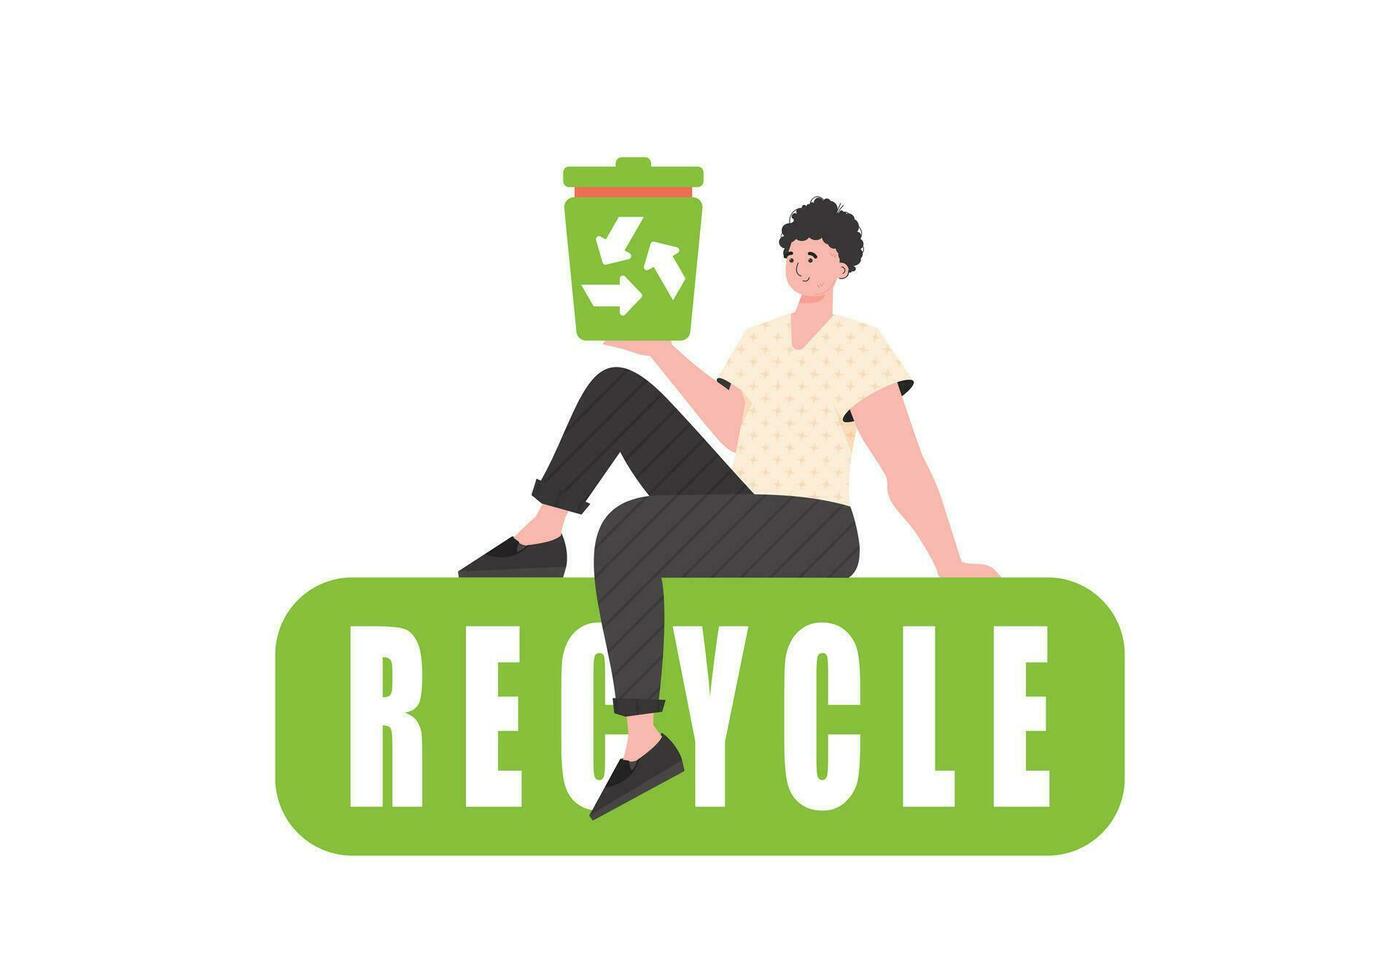 A man sits and holds an urn in his hands. The concept of recycling and zero waste. Isolated. Vector illustration.